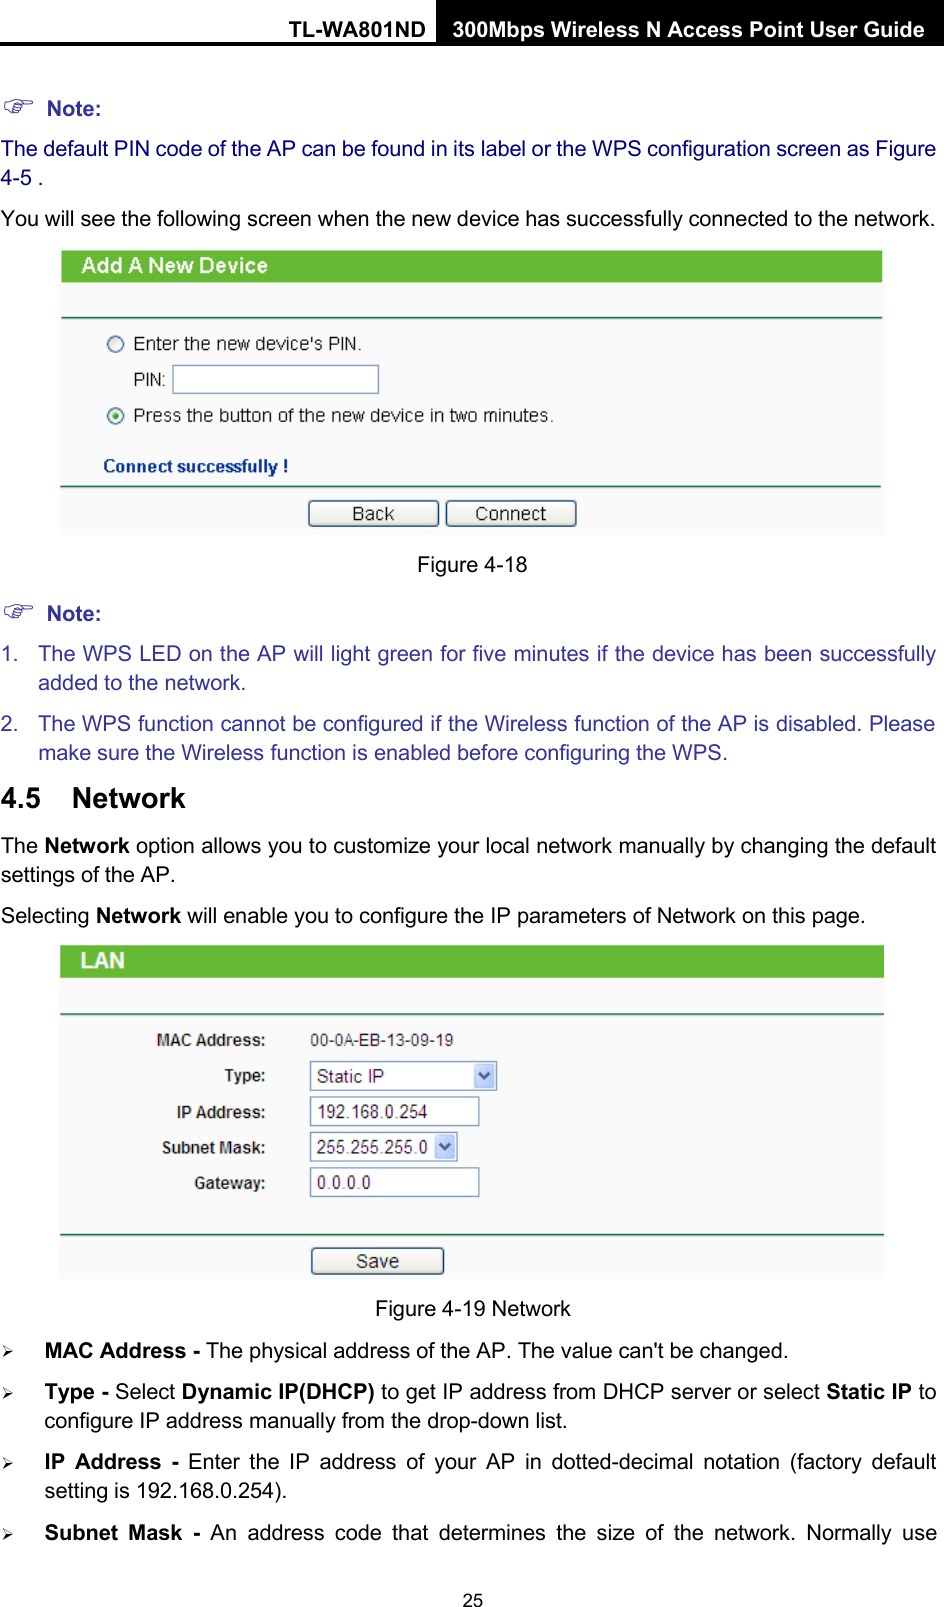 TL-WA801ND 300Mbps Wireless N Access Point User Guide 25     Note: The default PIN code of the AP can be found in its label or the WPS configuration screen as Figure 4-5 . You will see the following screen when the new device has successfully connected to the network.      Note: Figure 4-18 1. The WPS LED on the AP will light green for five minutes if the device has been successfully added to the network. 2. The WPS function cannot be configured if the Wireless function of the AP is disabled. Please make sure the Wireless function is enabled before configuring the WPS. 4.5 Network The Network option allows you to customize your local network manually by changing the default settings of the AP. Selecting Network will enable you to configure the IP parameters of Network on this page.   Figure 4-19 Network  MAC Address - The physical address of the AP. The value can&apos;t be changed.  Type - Select Dynamic IP(DHCP) to get IP address from DHCP server or select Static IP to configure IP address manually from the drop-down list.  IP Address - Enter the IP address of your AP in dotted-decimal notation (factory default setting is 192.168.0.254).  Subnet Mask - An address code that determines the size of the network. Normally use 